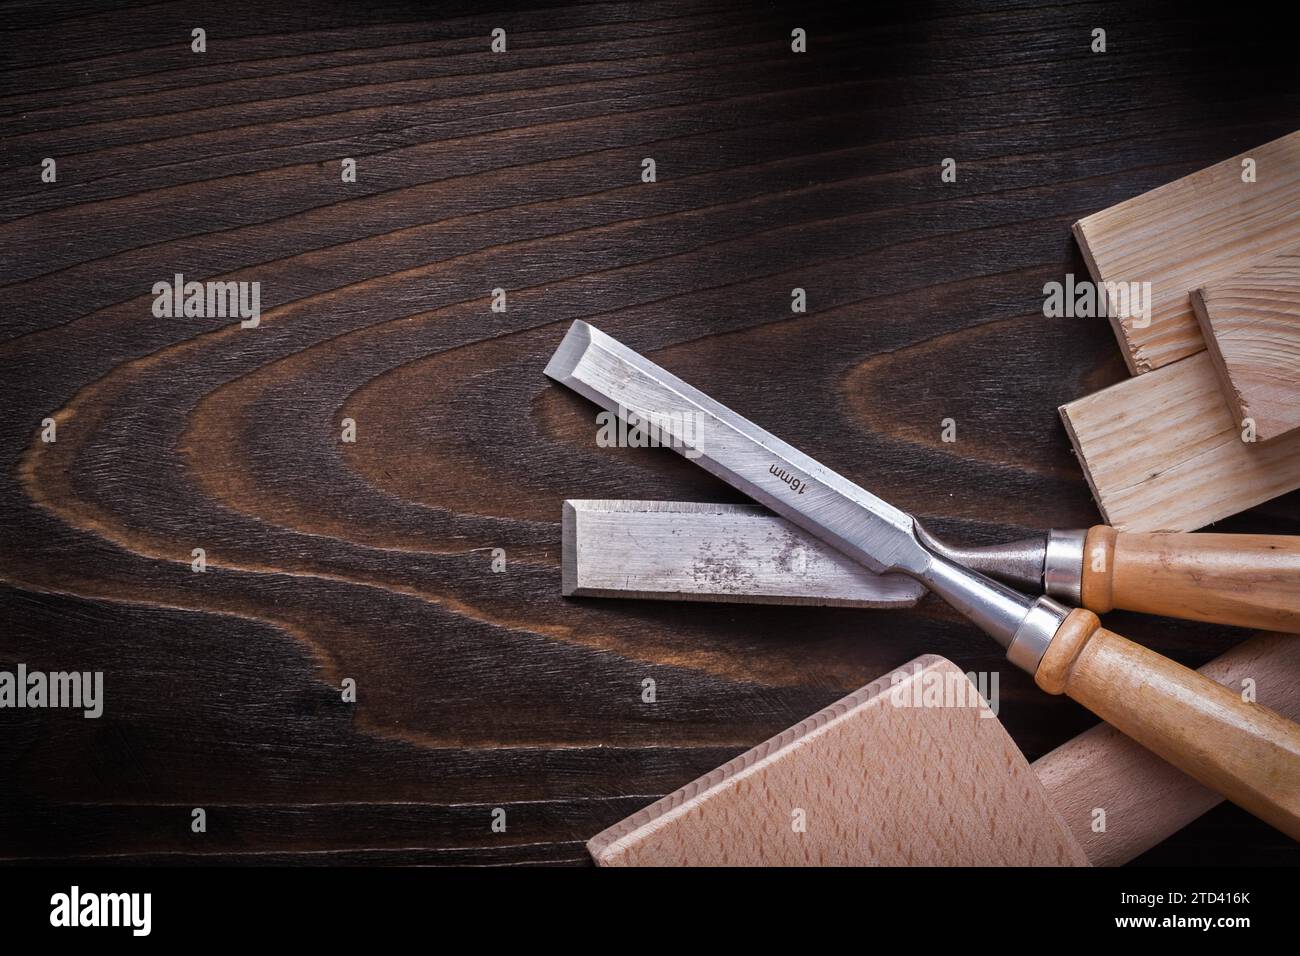 Lump hammer fixed chisel and wooden planks on brown vintage wooden board Building concept Stock Photo